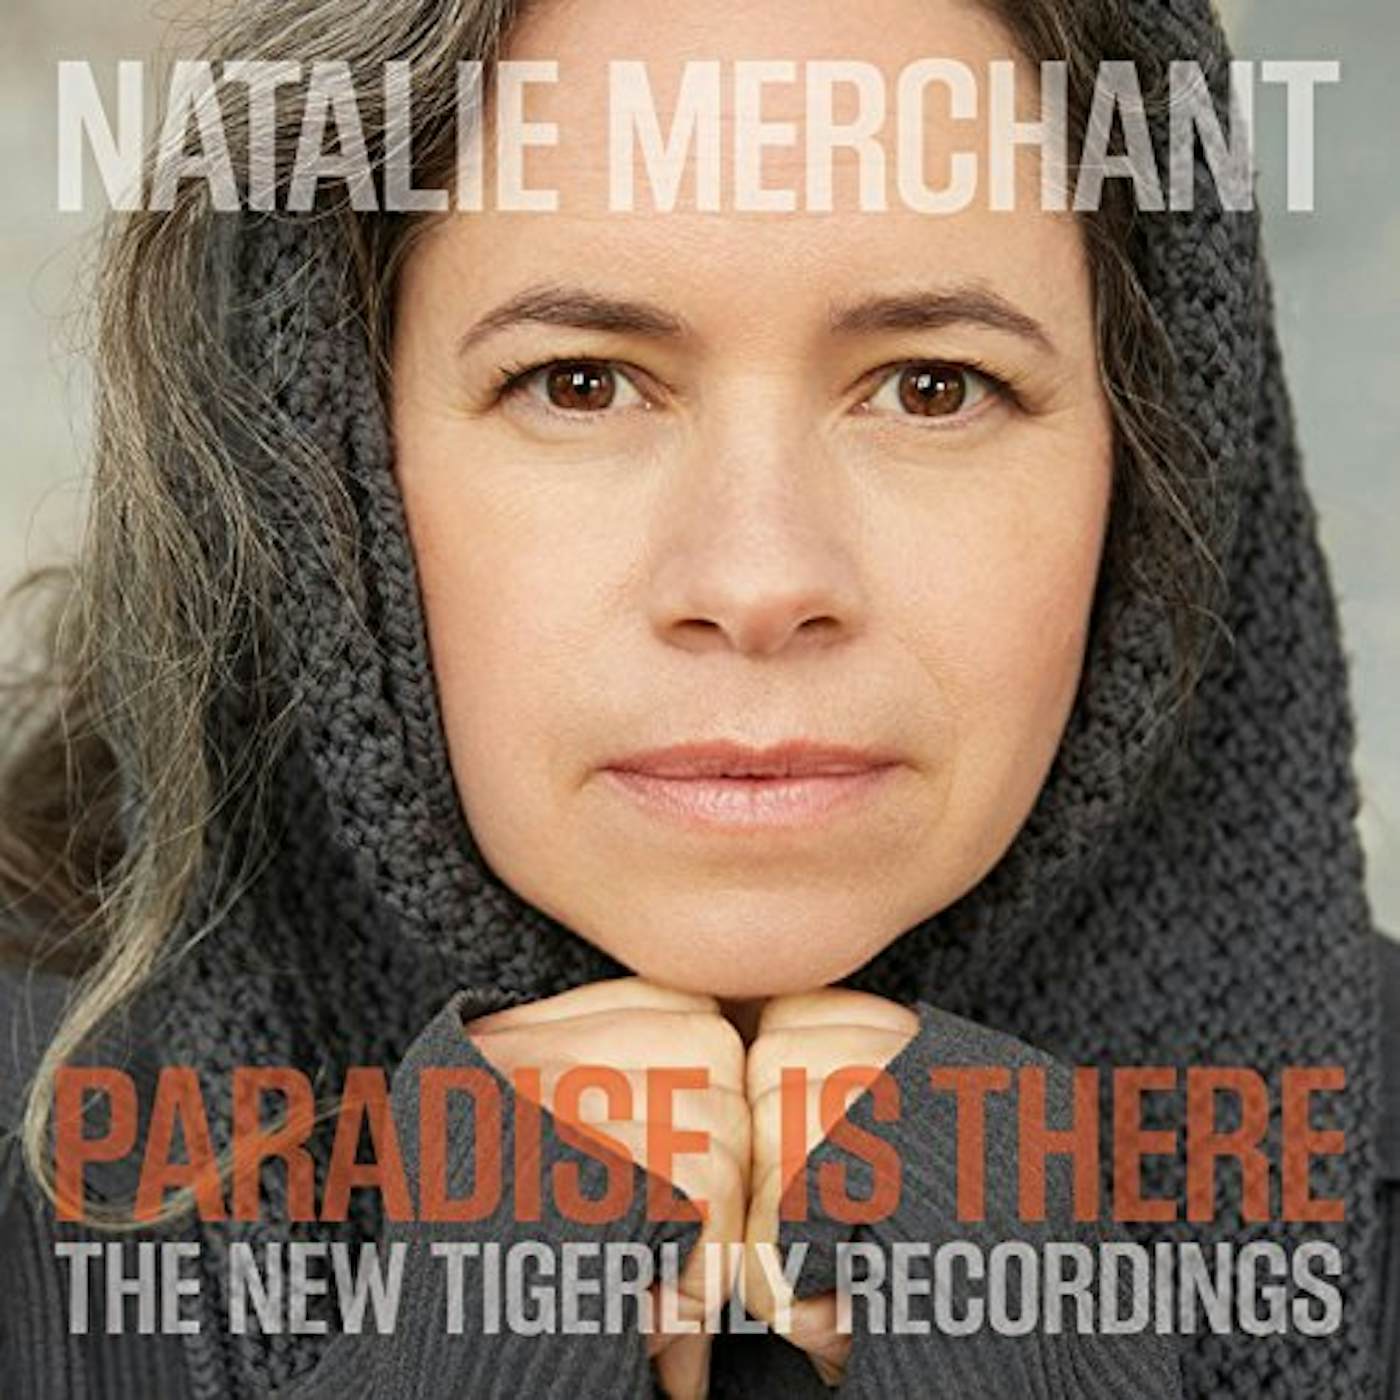 Natalie Merchant PARADISE IS THERE: THE NEW TIGERLILY RECORDINGS CD